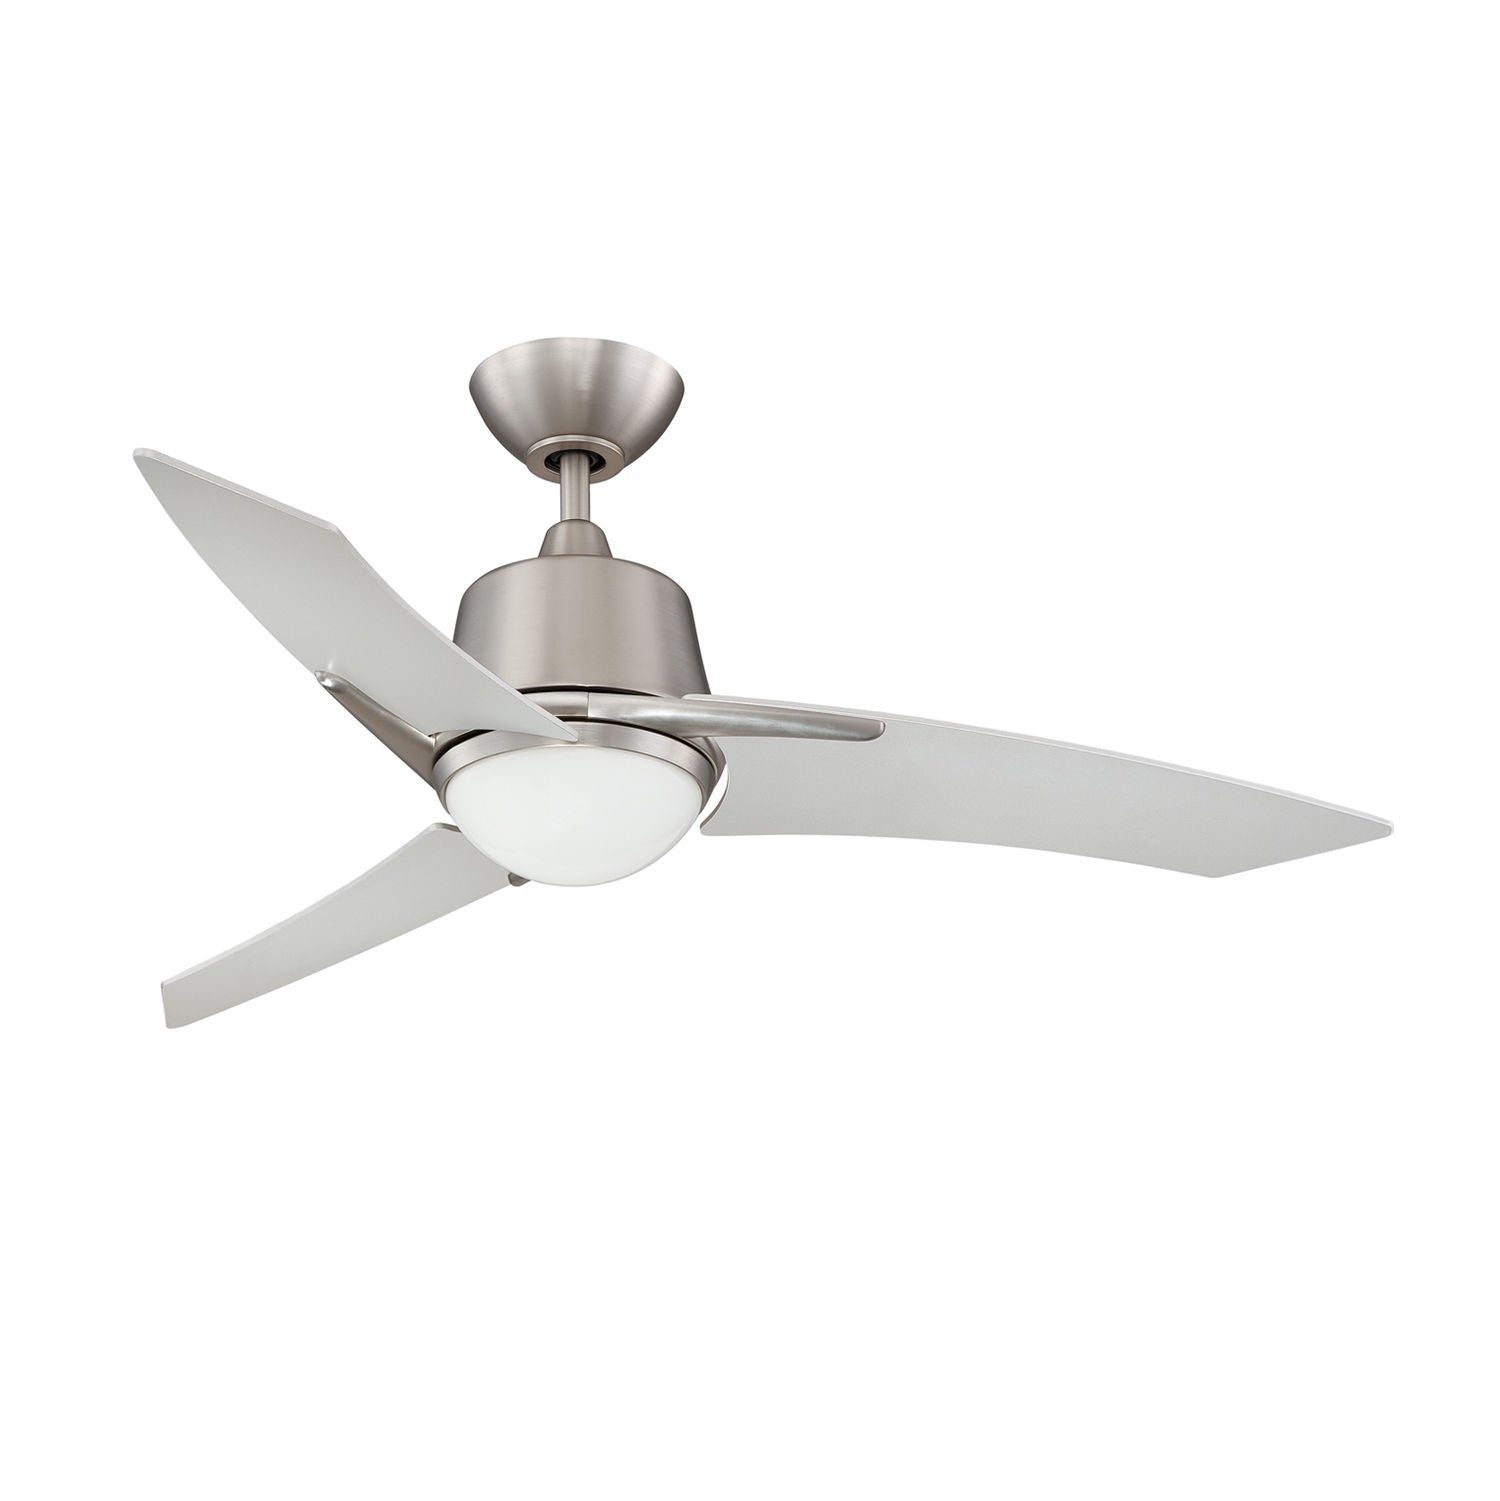 SCIMITAR LED Ceiling fan Stainless steel INTEGRATED LED - AC19544L-SN | KENDAL